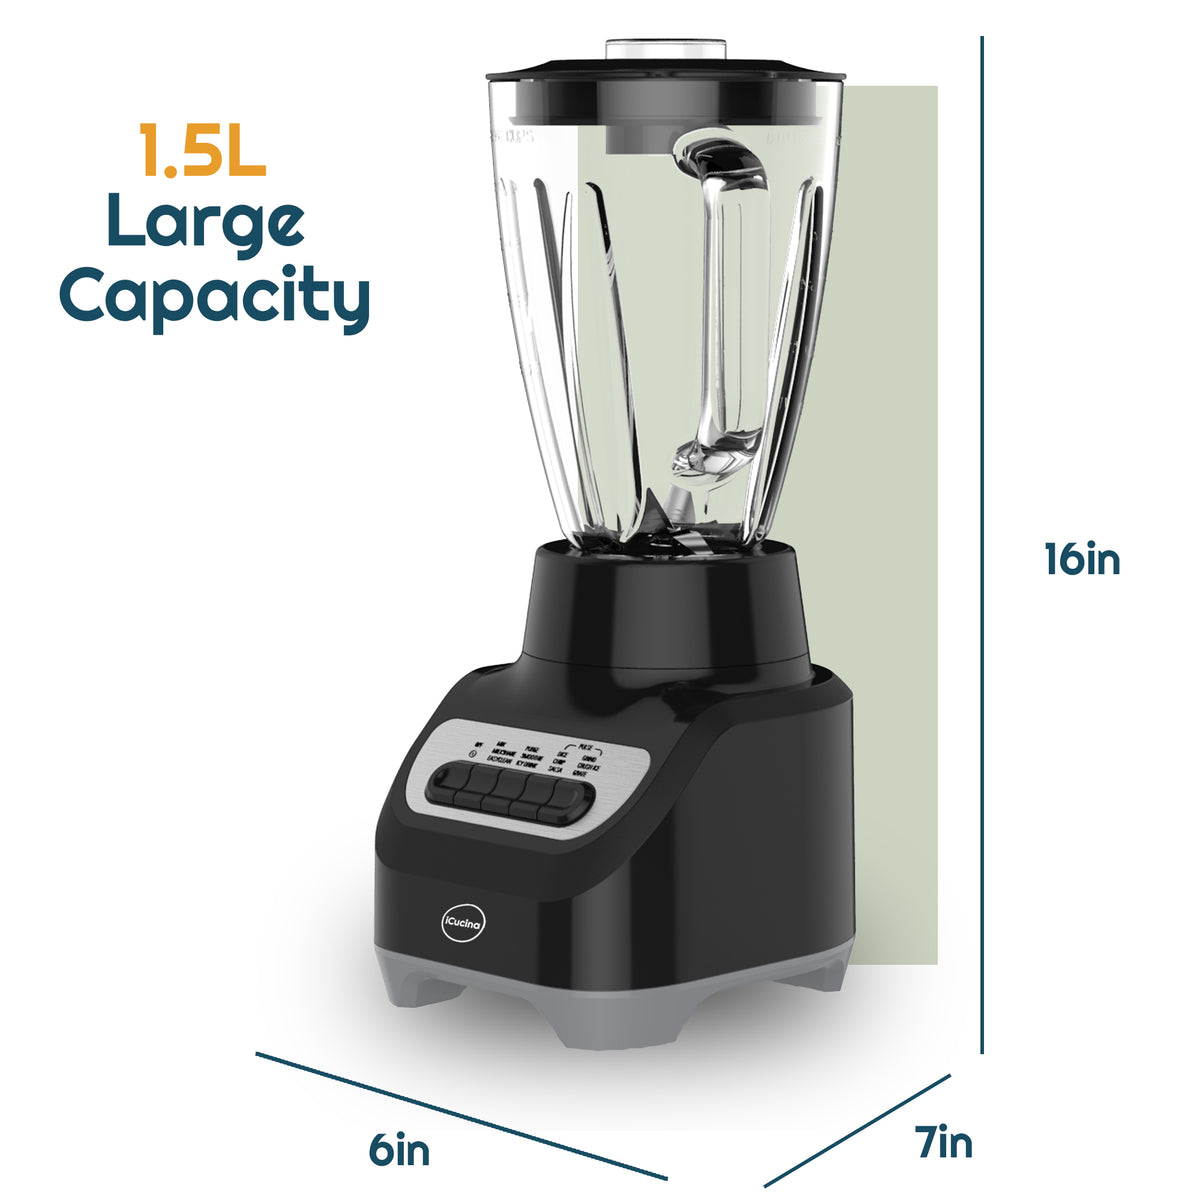 Toscana 300W Personal Blender - Curacao 